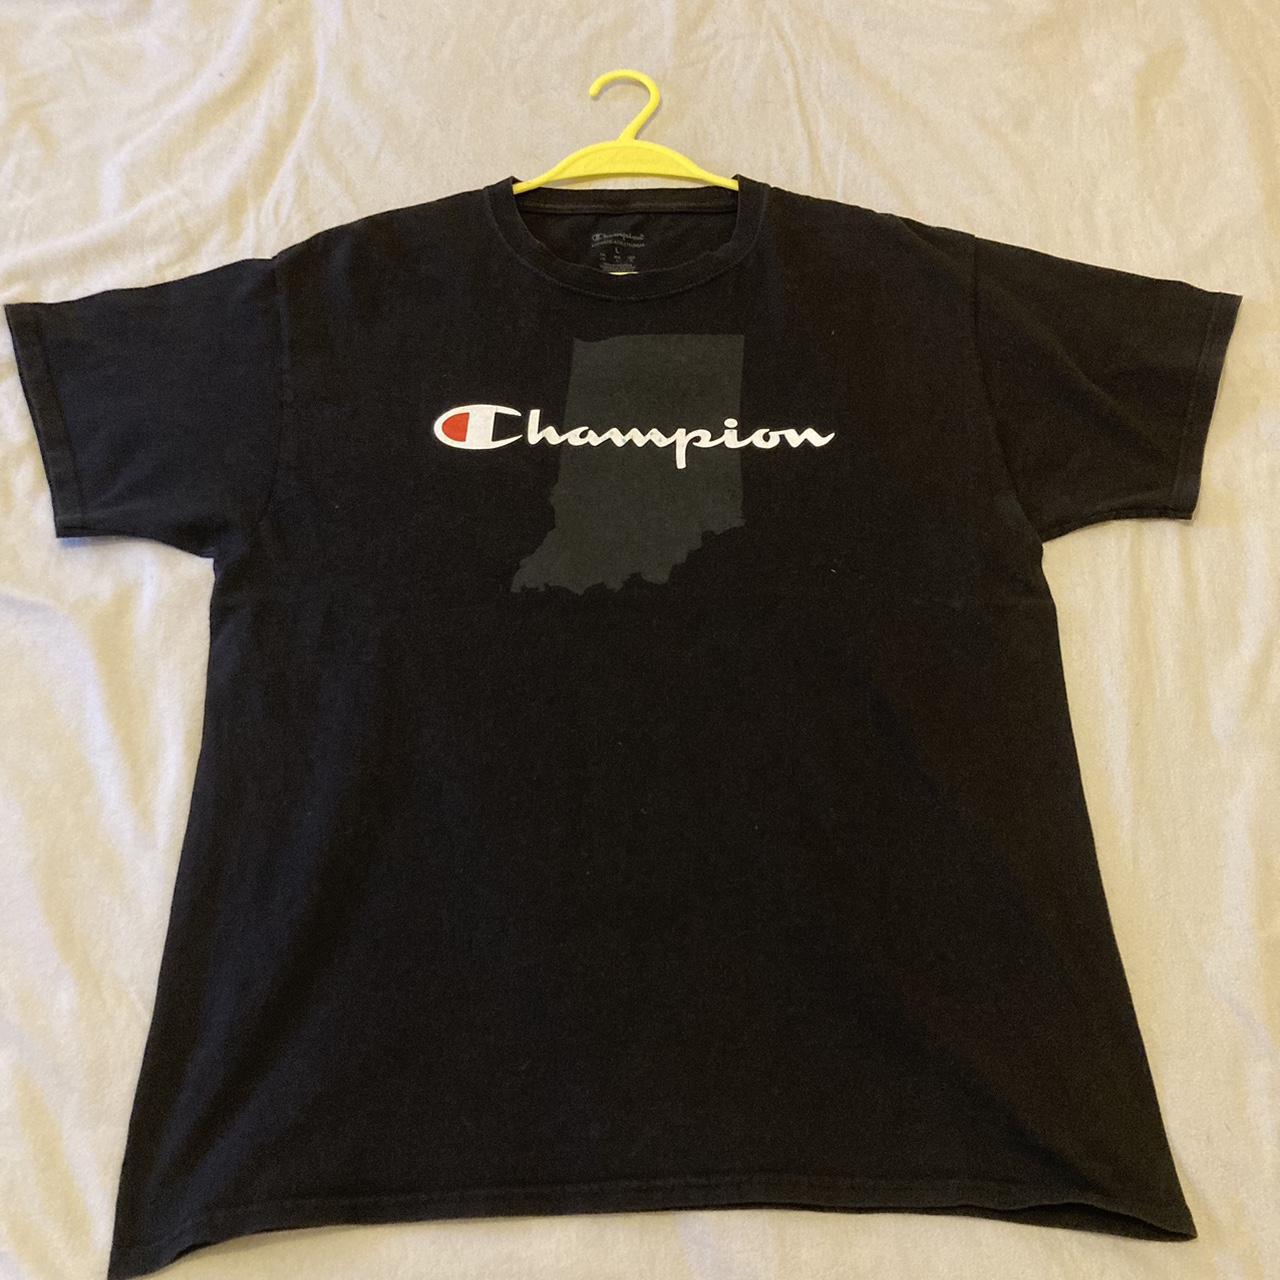 Champion T-shirt in size L Original USA import from... - Depop